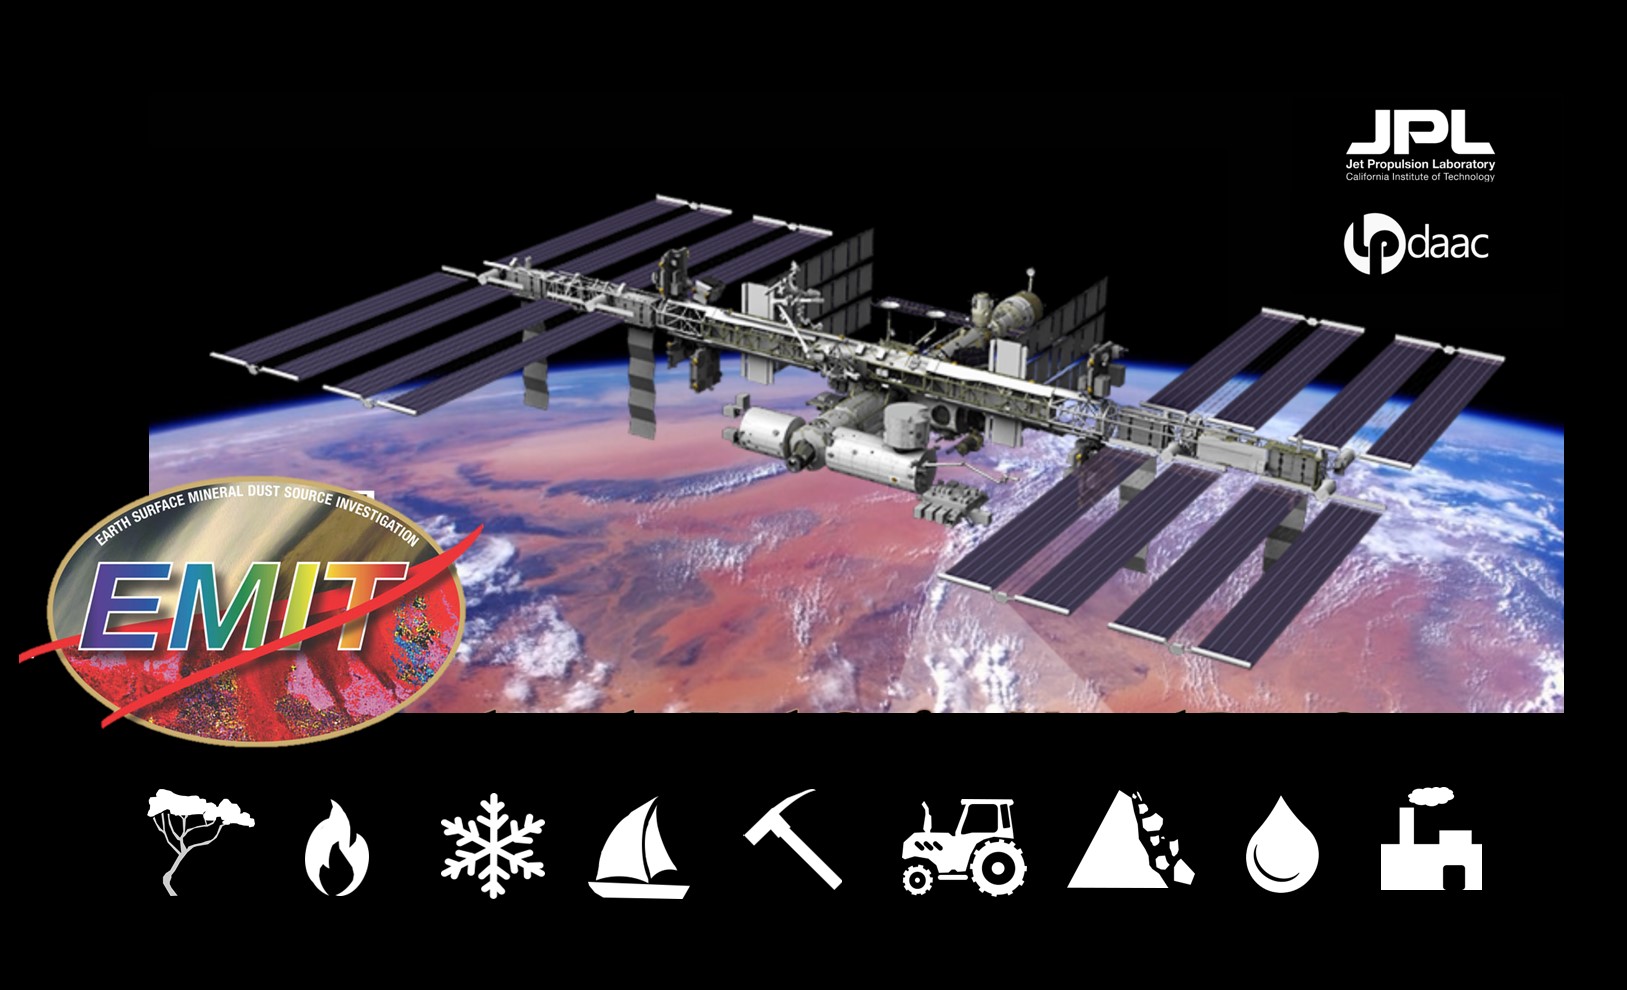 This webinar banner image shows the  International Space Station with NASA Earth Surface Mineral Dust Investigation (EMIT) sensor viewing Earth from space with EMIT logo in lower left and silhouetted pictograms representing applications of EMIT data, including forestry and biodiversity, fire, snow and ice, near shore water quality and algal blooms, geology, agricultural, landslides and natural hazards, water, and greenhouse gas emissions.